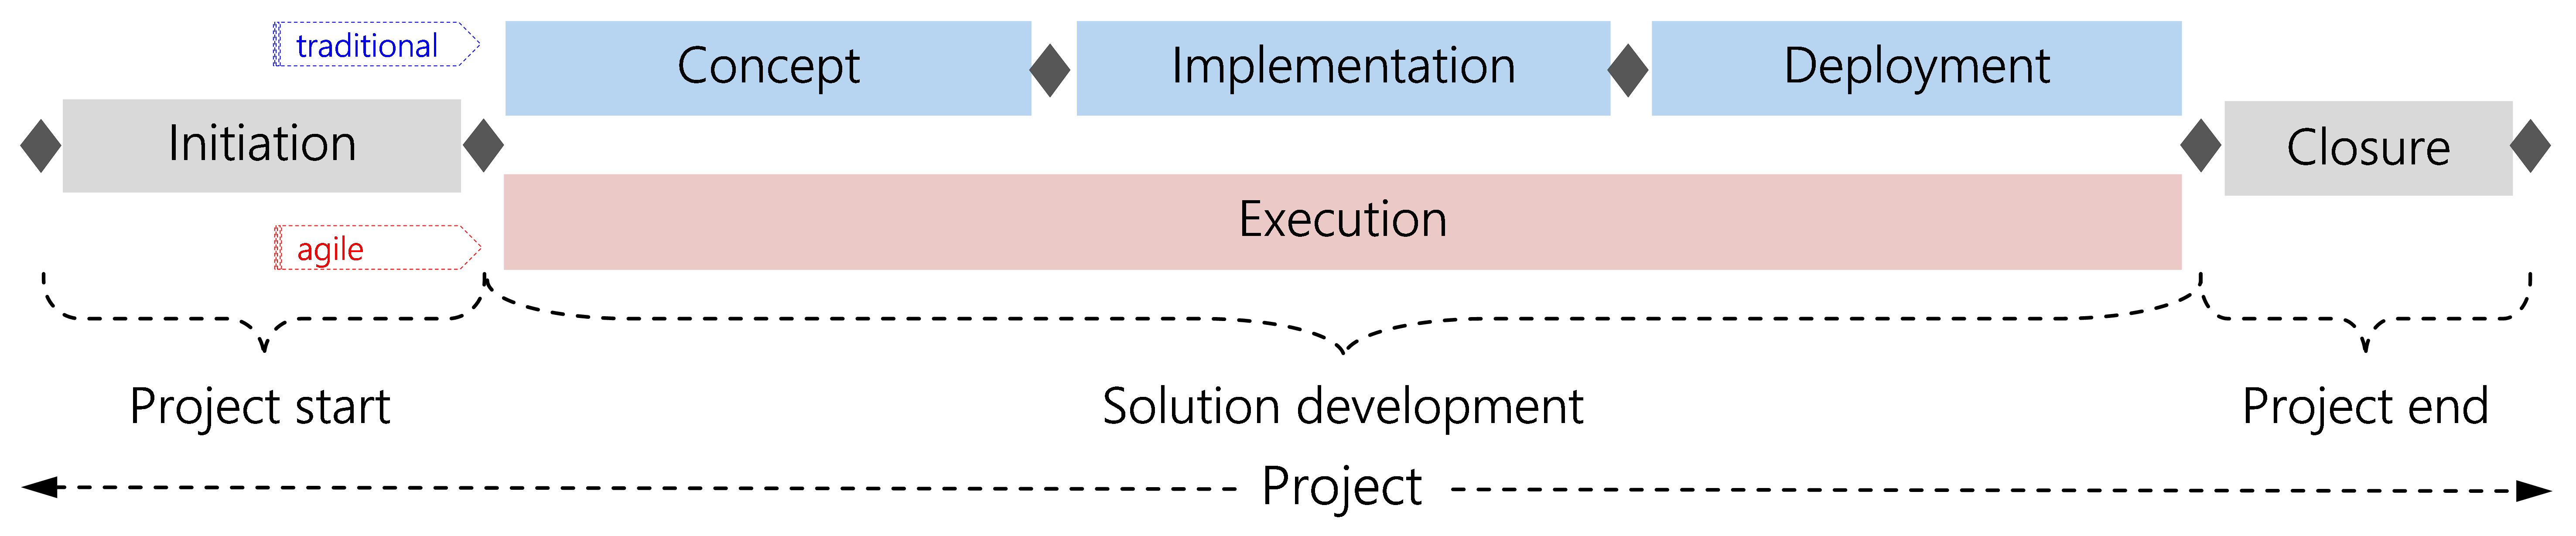 Figure 5: HERMES project life cycle with phase model for traditional and agile approach